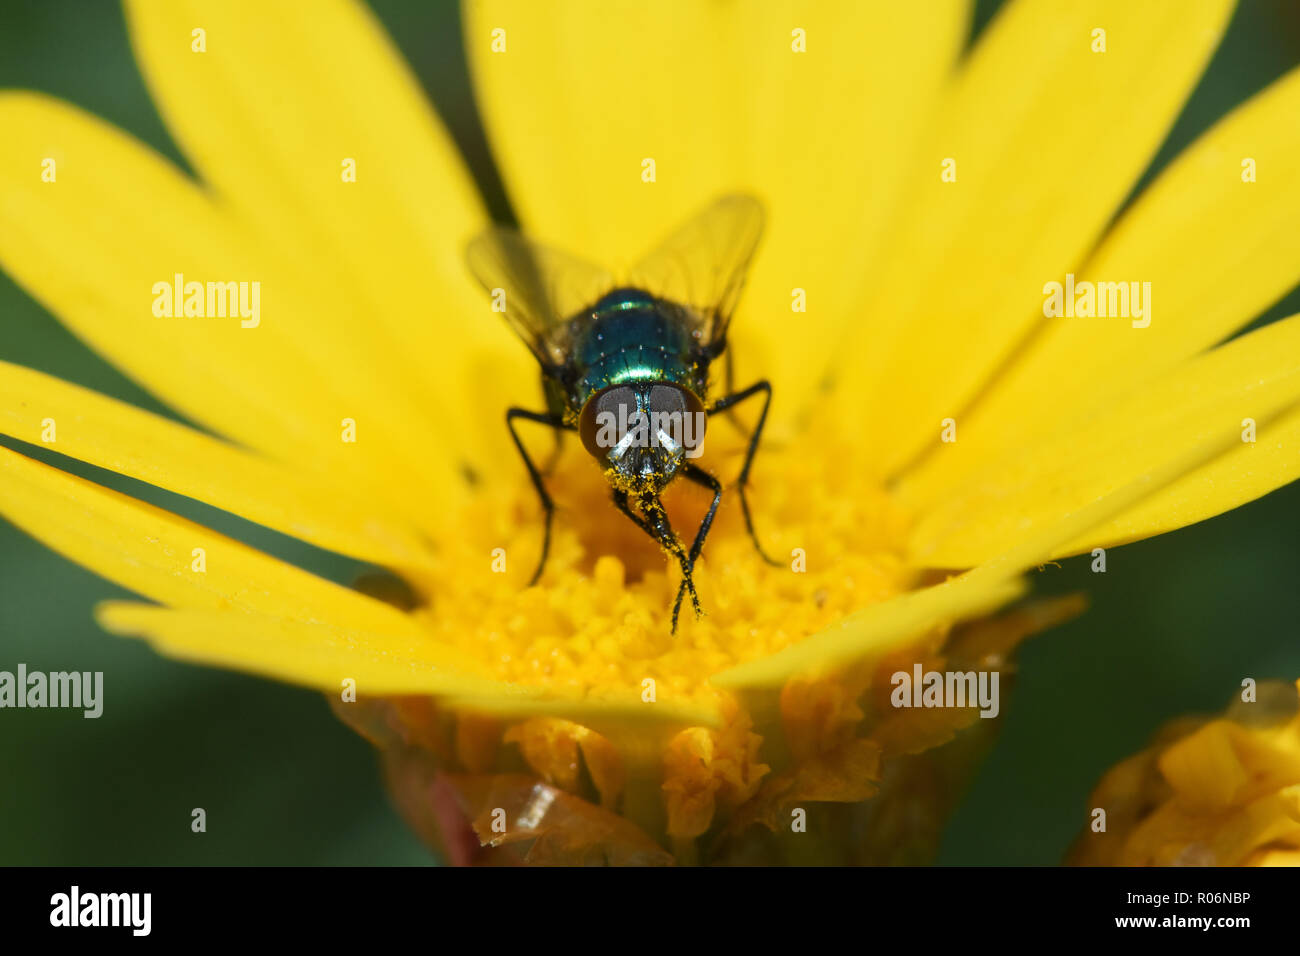 Save Download Preview Green Fly on flower Stock Photo